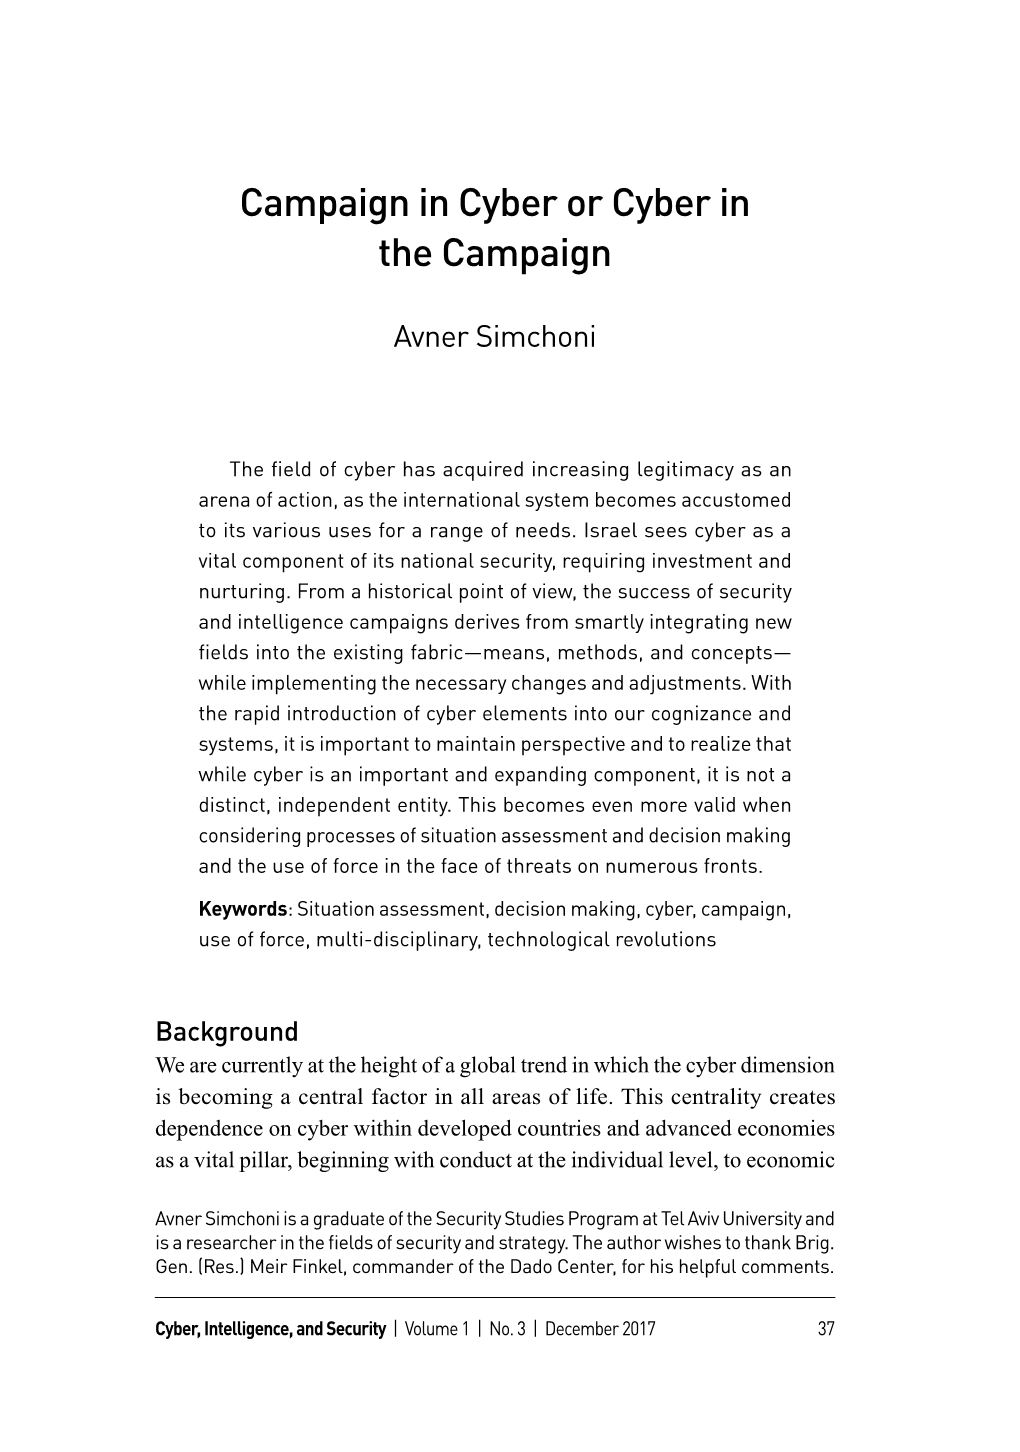 Campaign in Cyber Or Cyber in the Campaign